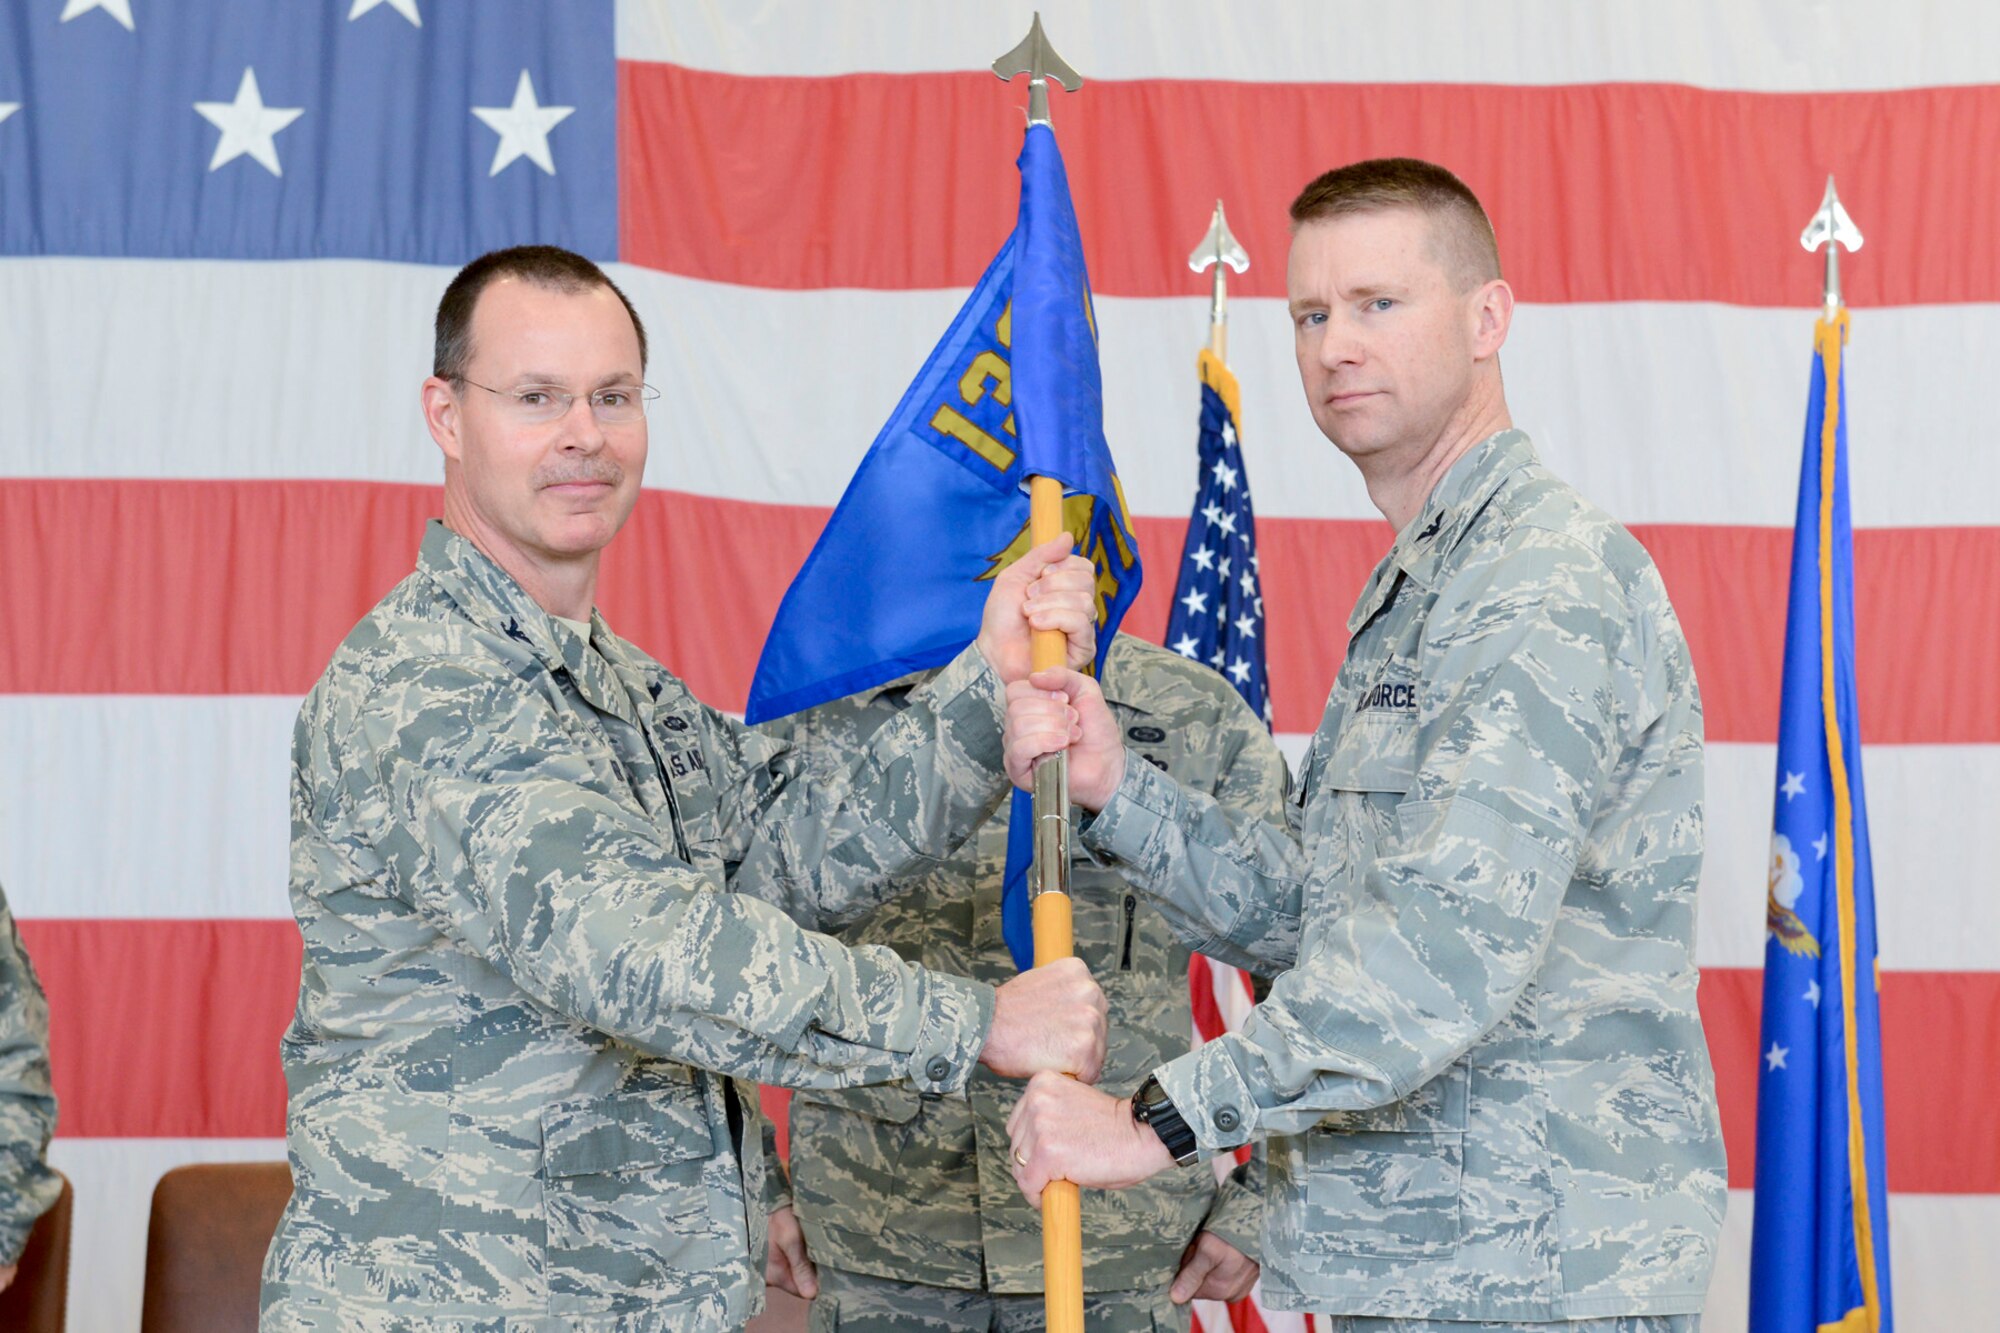 Col. Kevin Heer (left), Commander, 132d Wing (132WG), Des Moines, Iowa, passes the 132d Intelligence Surveillance Reconnaissance Group (ISRG) guidon to Col. Mark Chidley (right), 132WG ISRG Commander, during the 132WG ISRG Activation Ceremony held in the 132WG Fire House on Saturday, March 7, 2015.  This ceremony formally recognizes the official activation of the 132WG ISRG.  (U.S. Air National Guard photo by Staff Sgt. Linda K. Burger/Released)